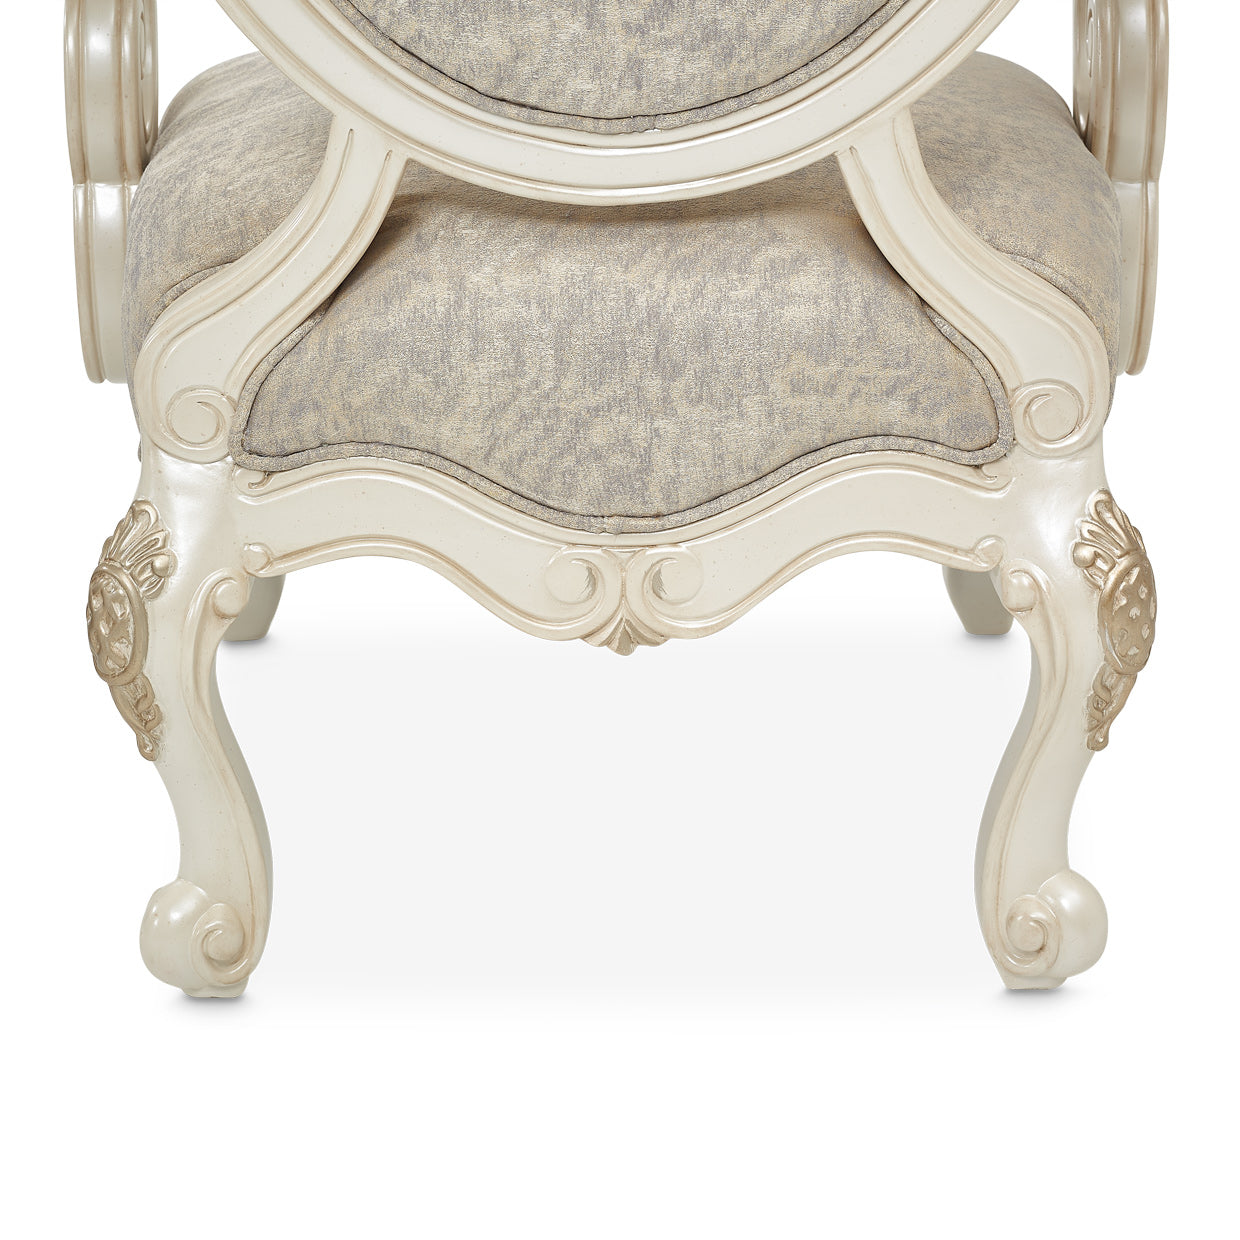 LAVELLE-CLASSIC PEARL Lavelle Oval Back Wood Chair Mystic Classic Pearl - Dream art Gallery